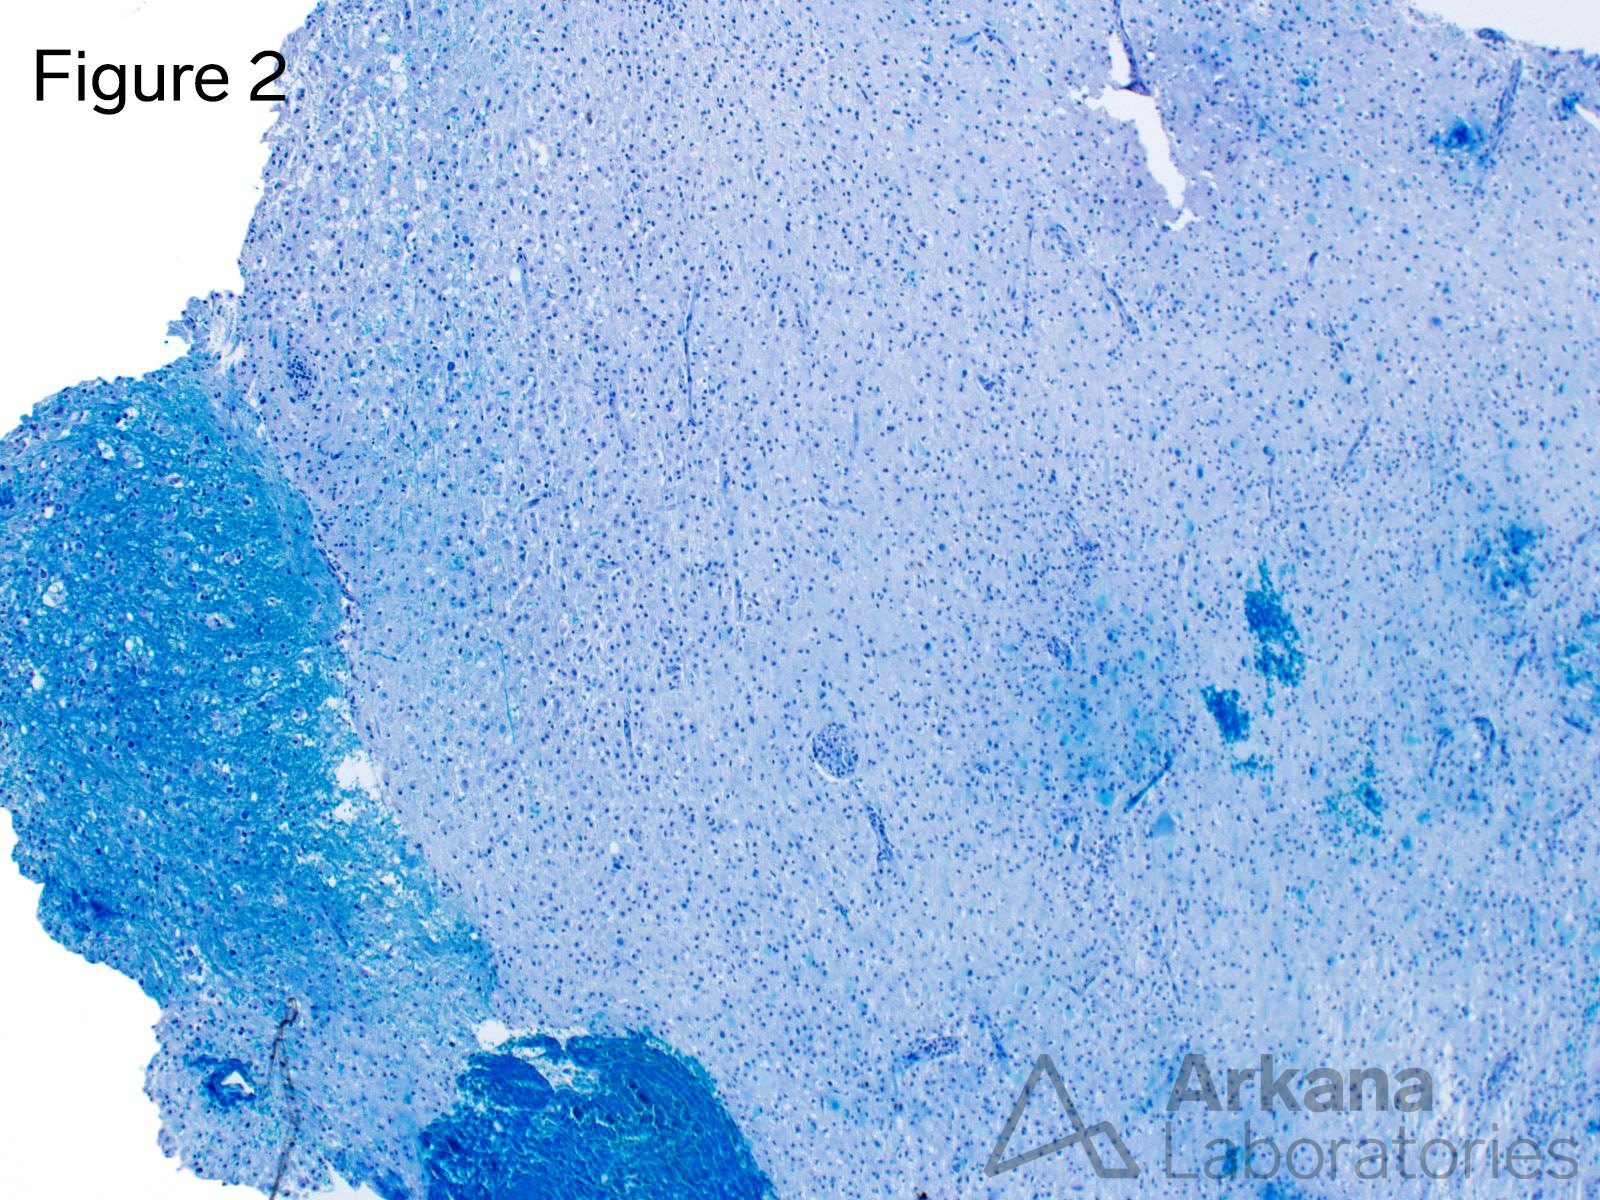 This low power image of a Luxol-Fast-Blue histochemical preparation (myelin stain) shows areas of white matter with preserved blue-staining myelin